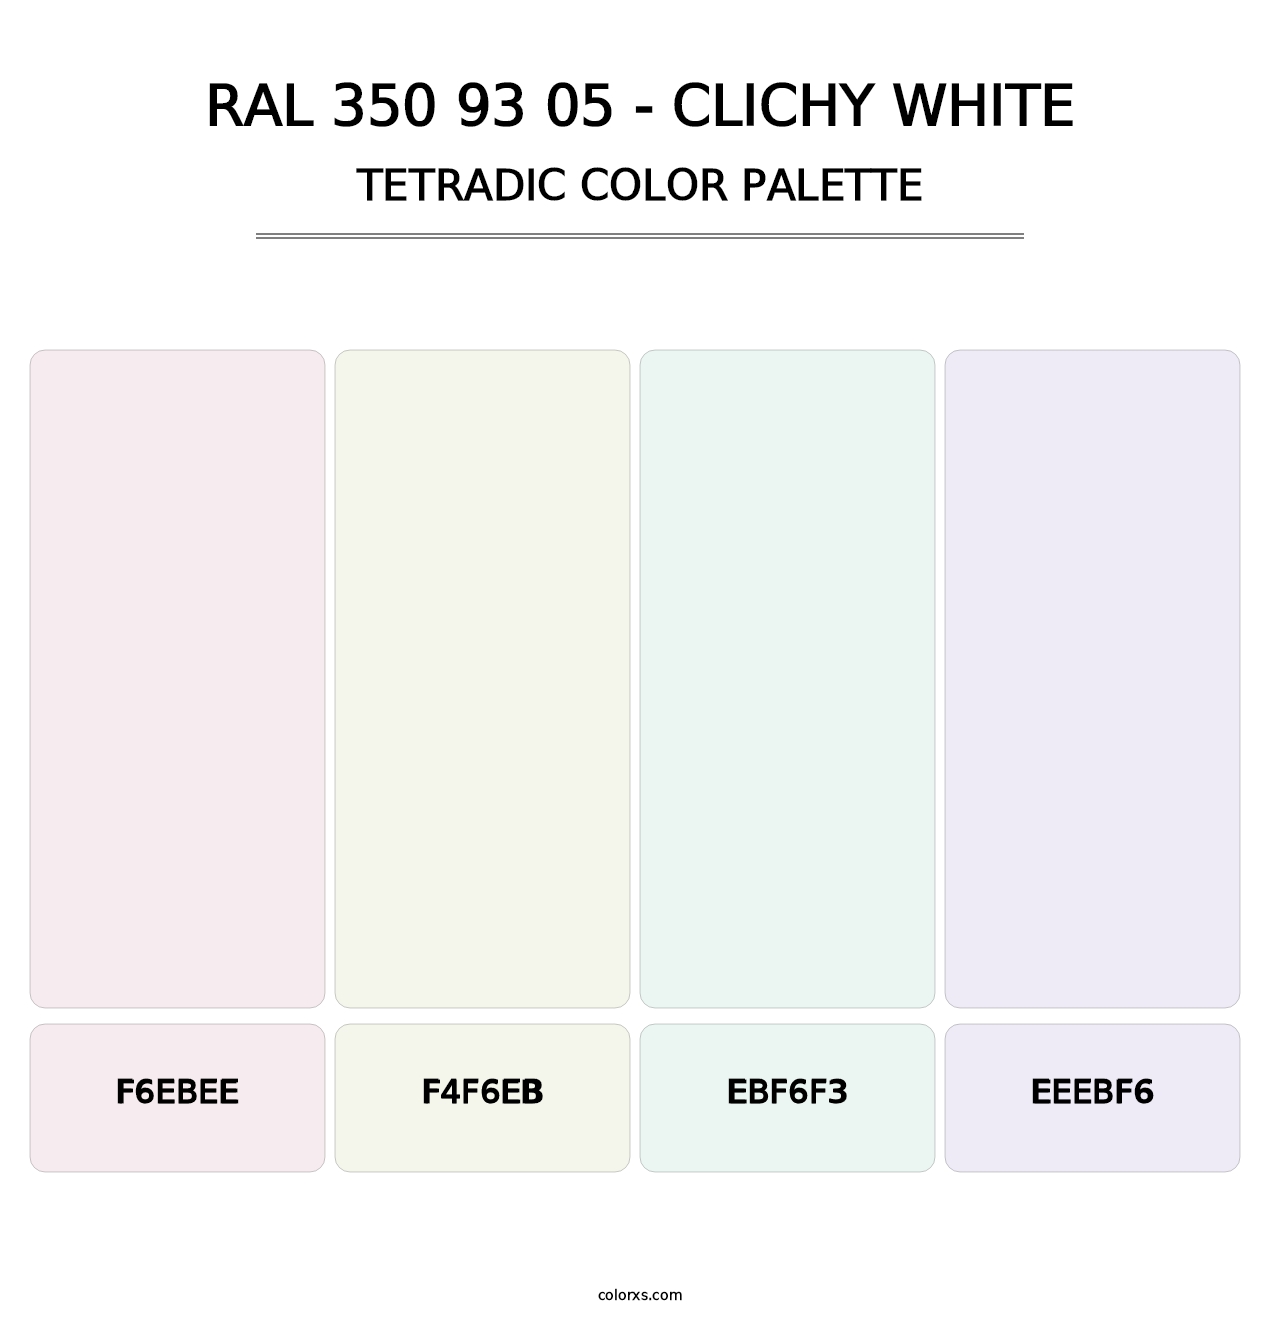 RAL 350 93 05 - Clichy White - Tetradic Color Palette